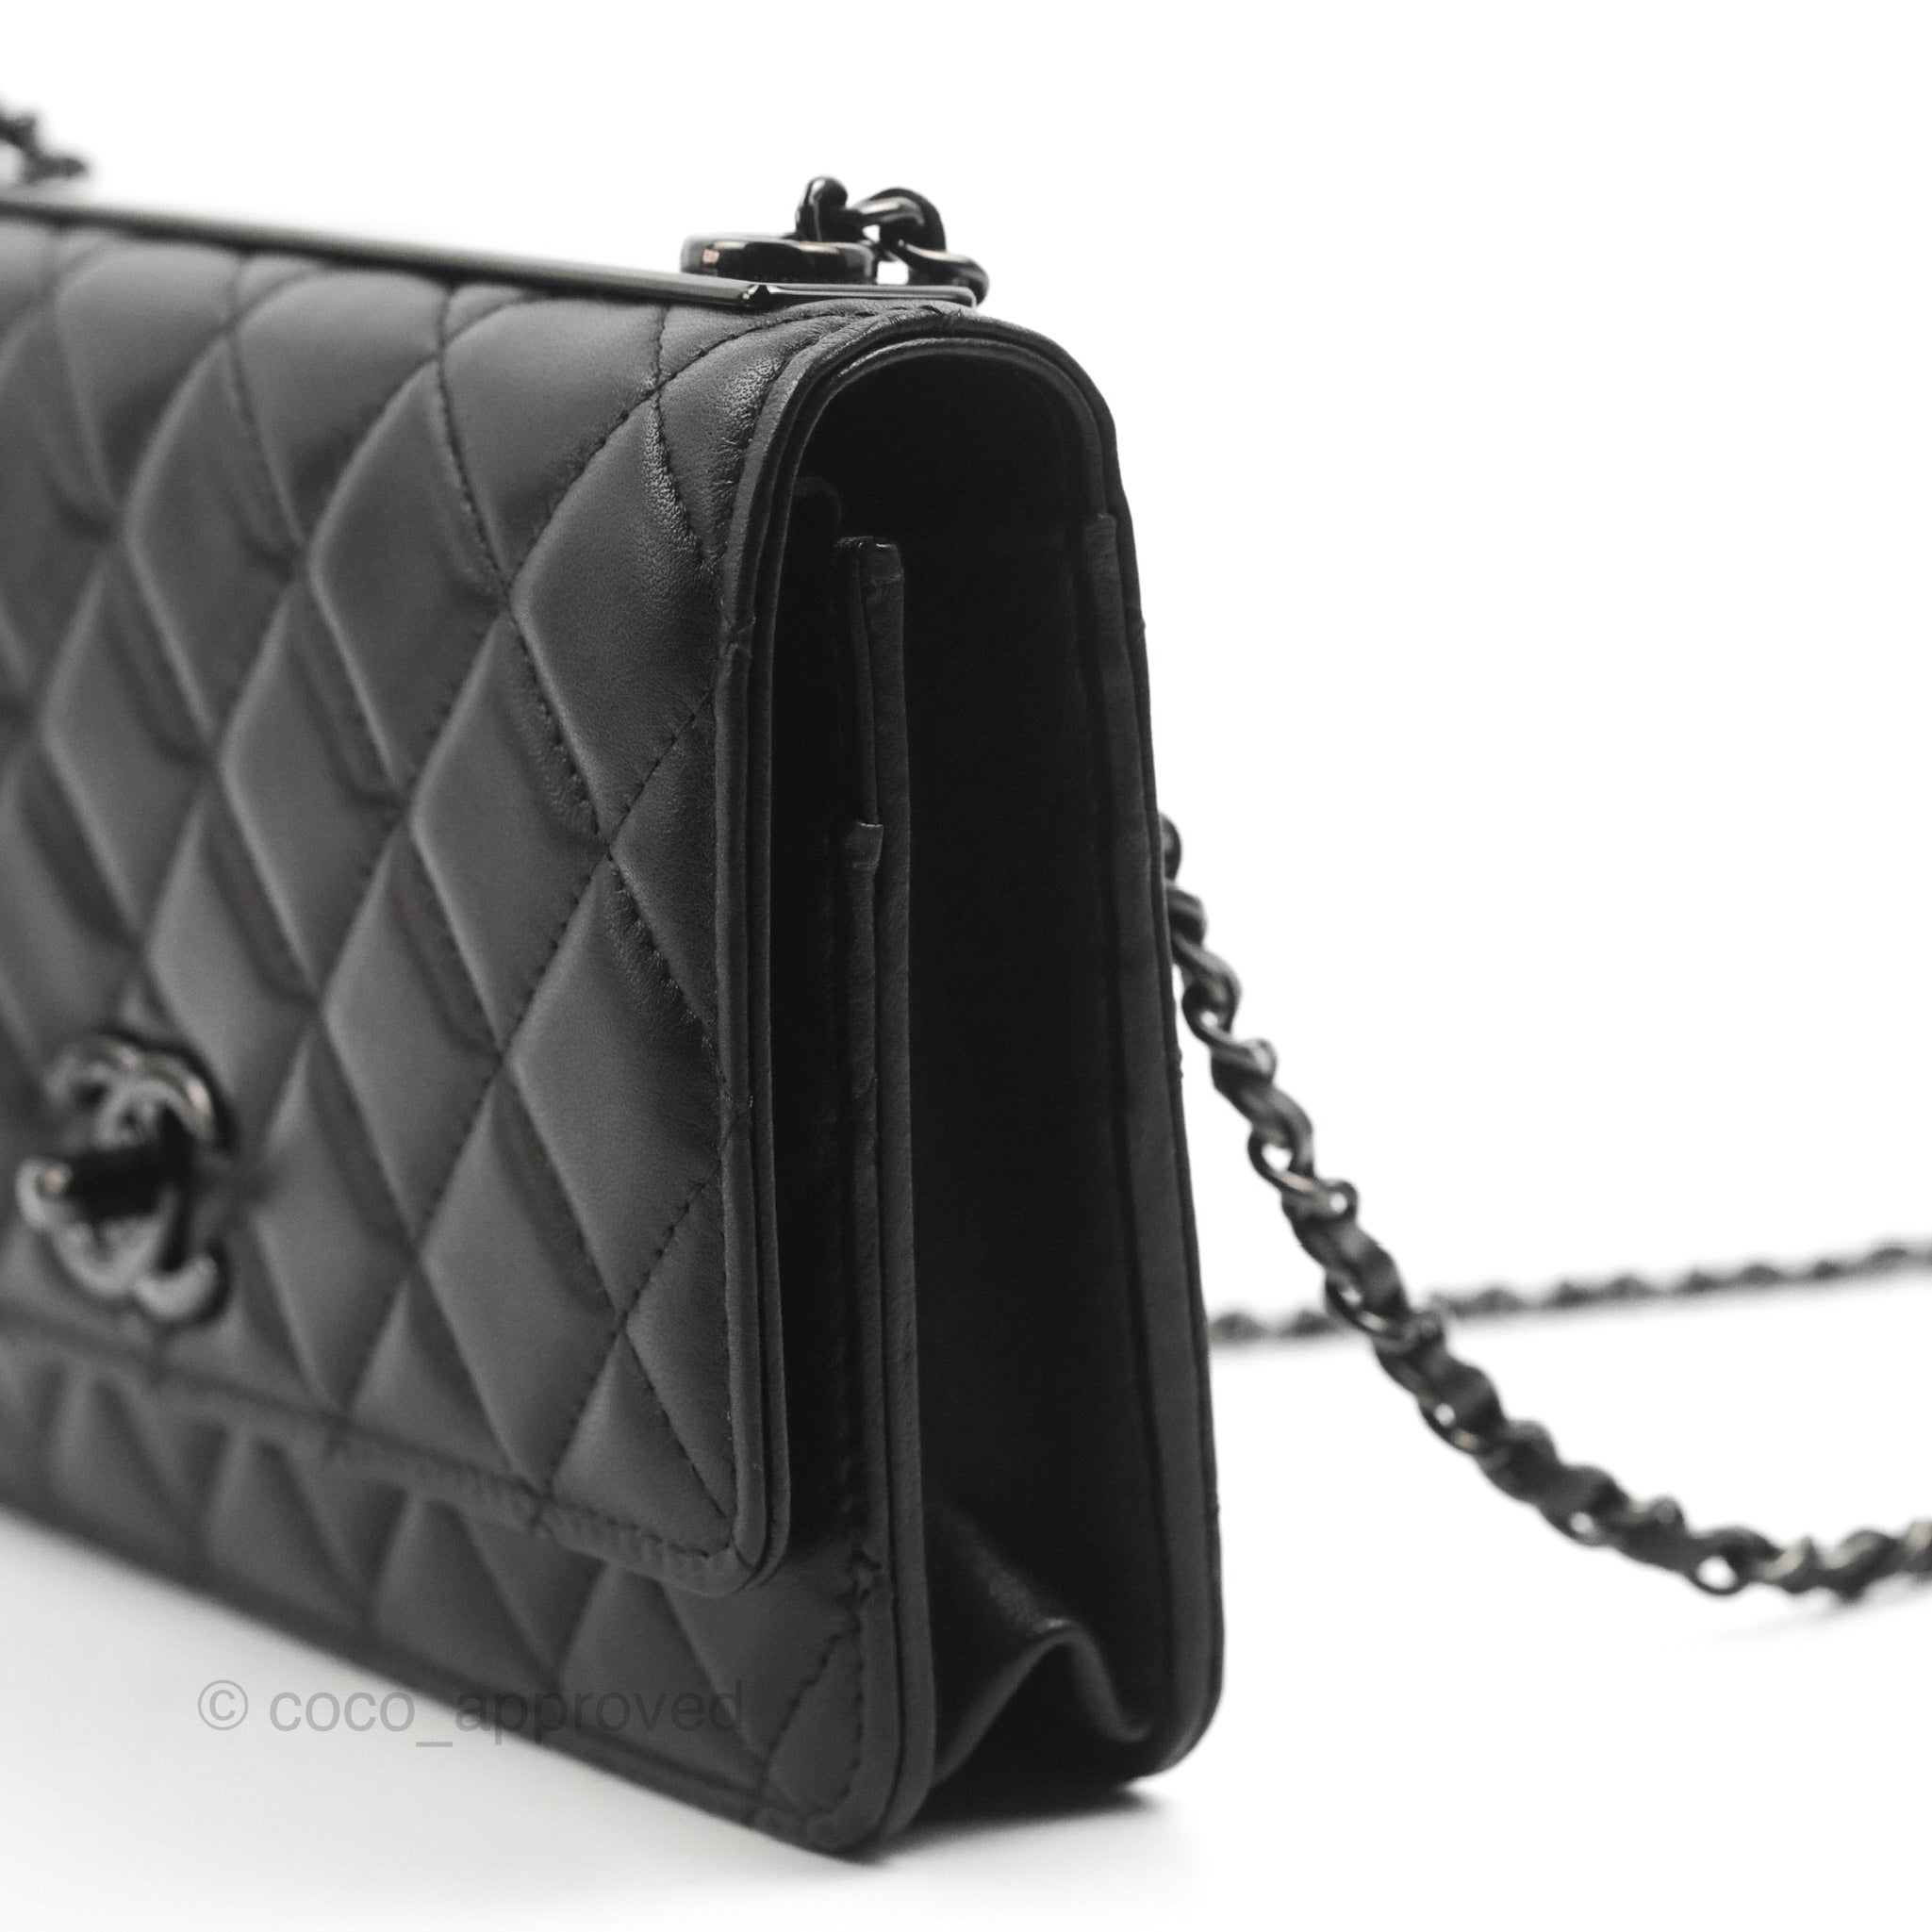 The new so black WOC with pearly lambskin 🖤 : r/chanel